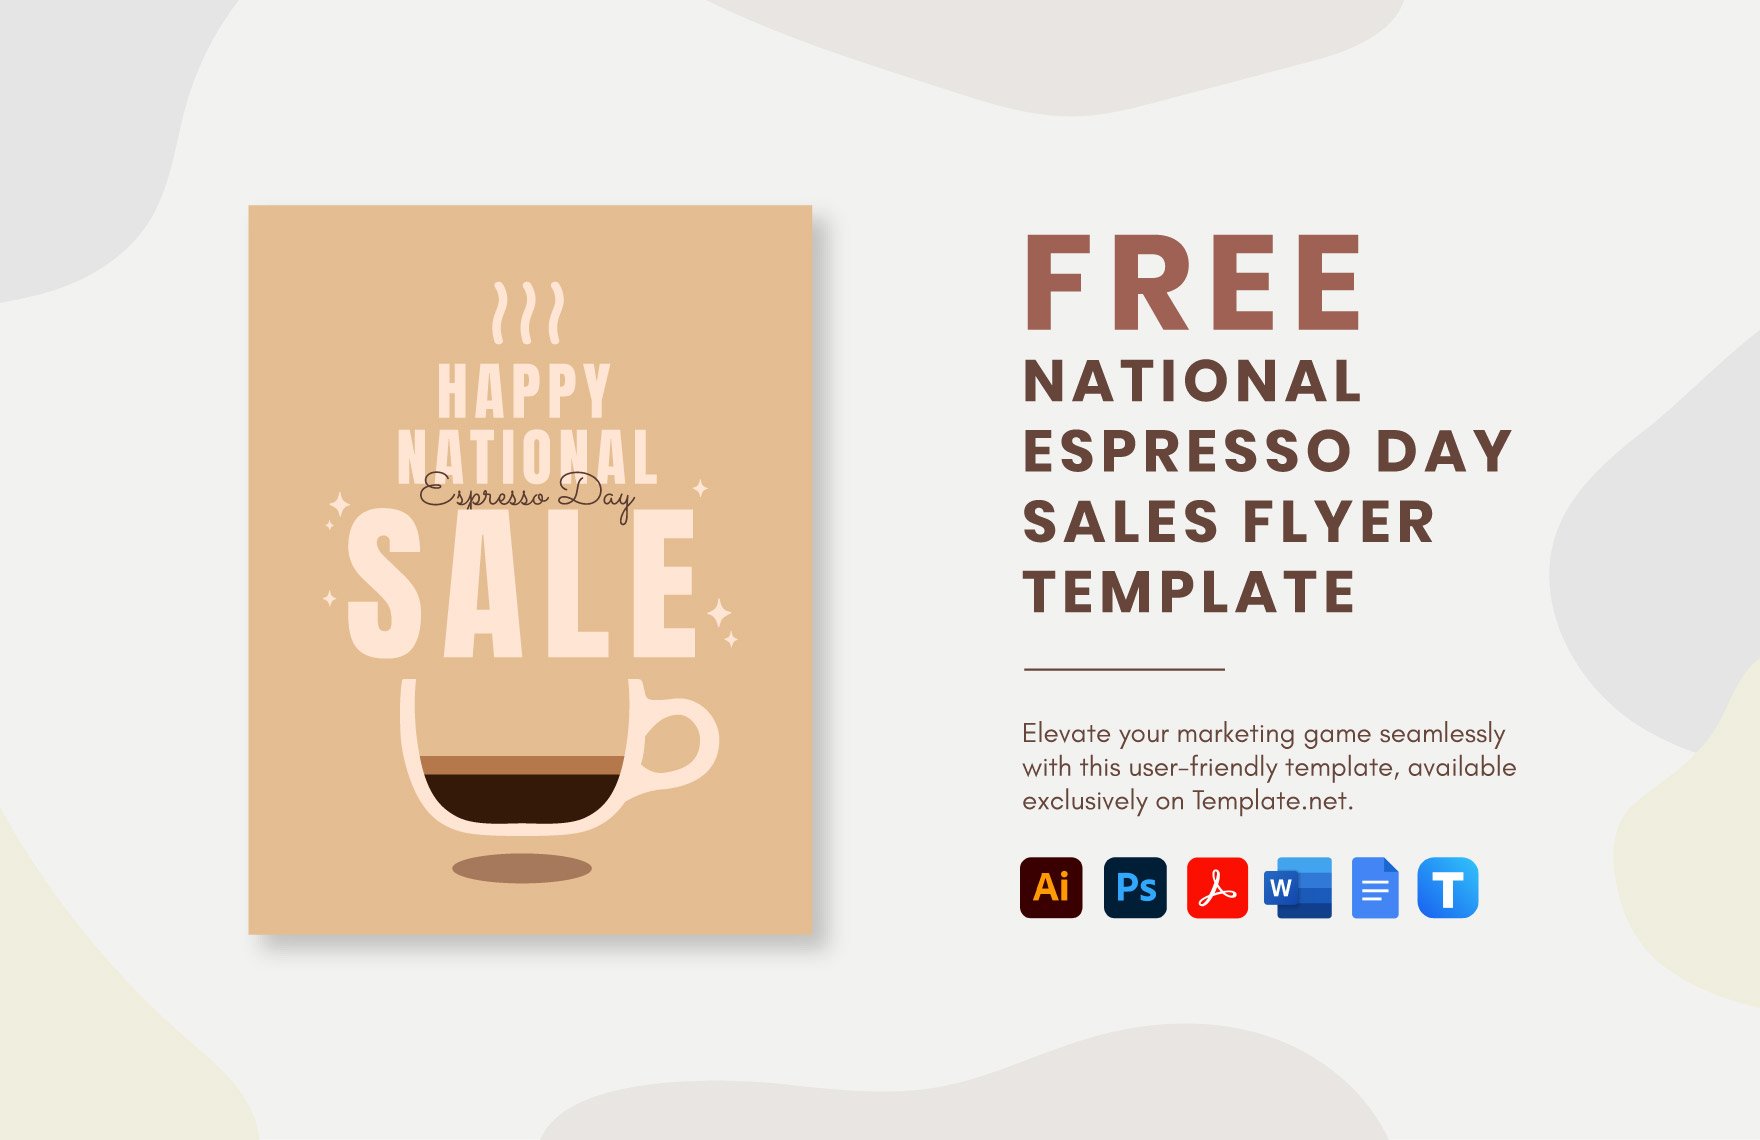 National Espresso Day Sales Flyer Template